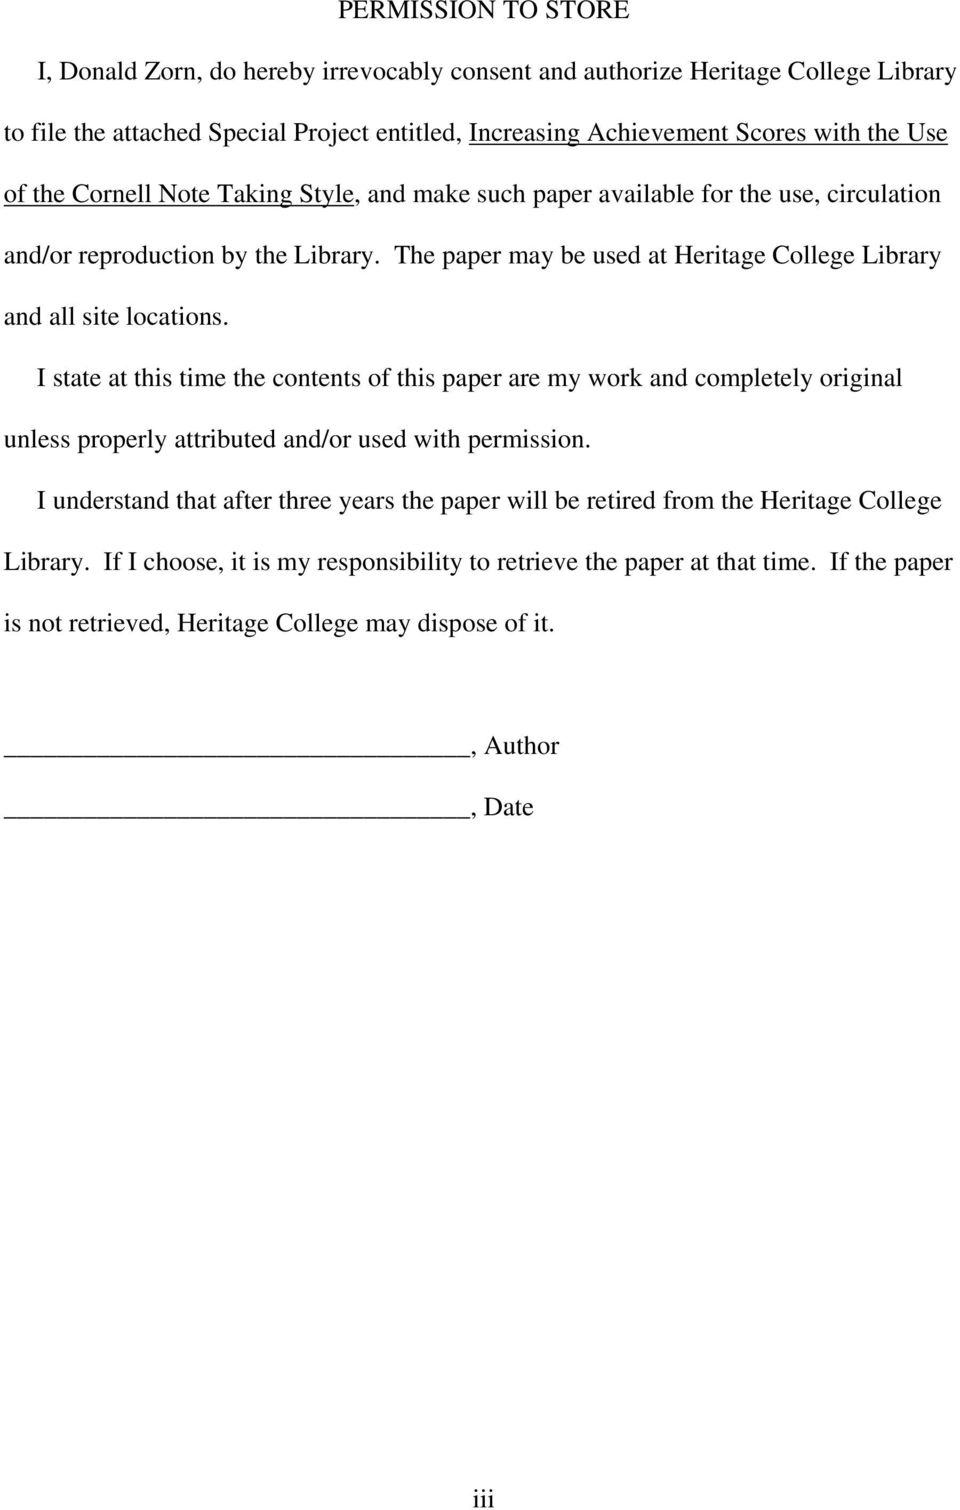 The paper may be used at Heritage College Library and all site locations.